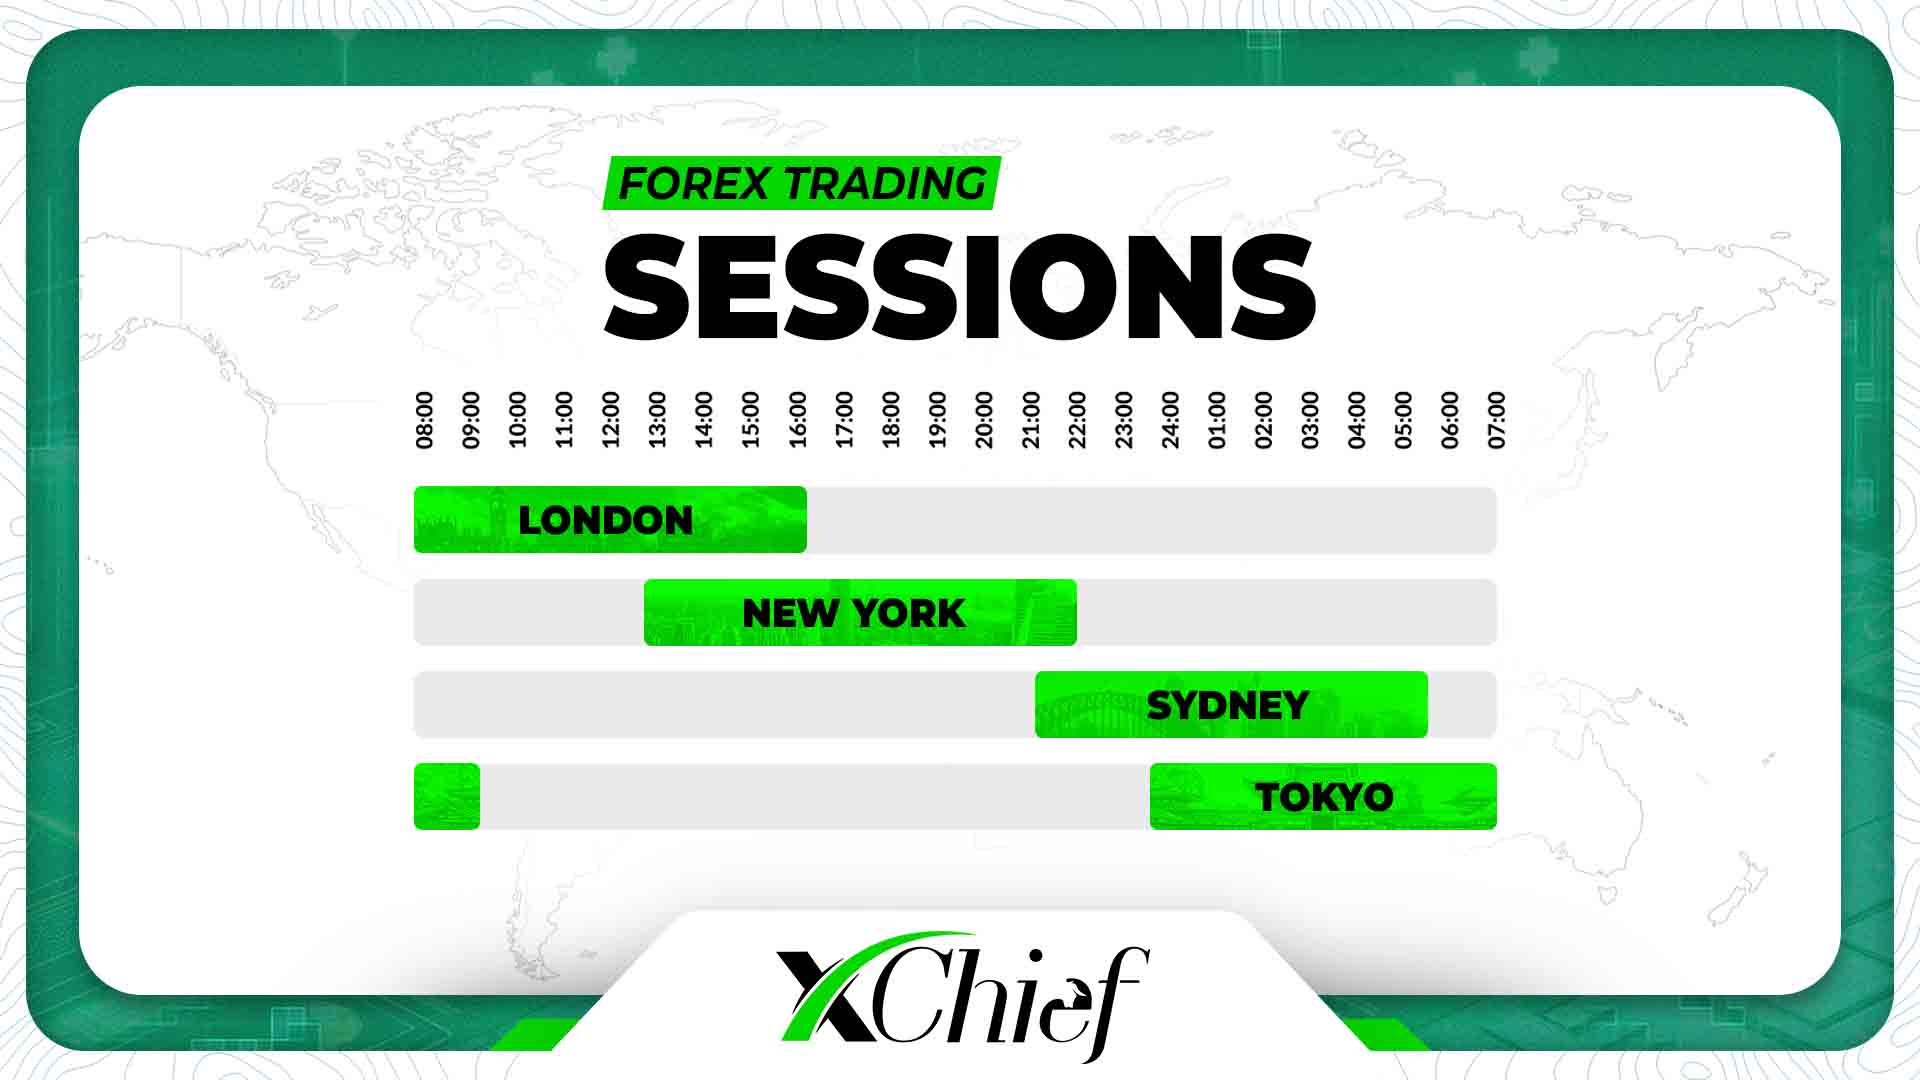 The most important forex trading sessions